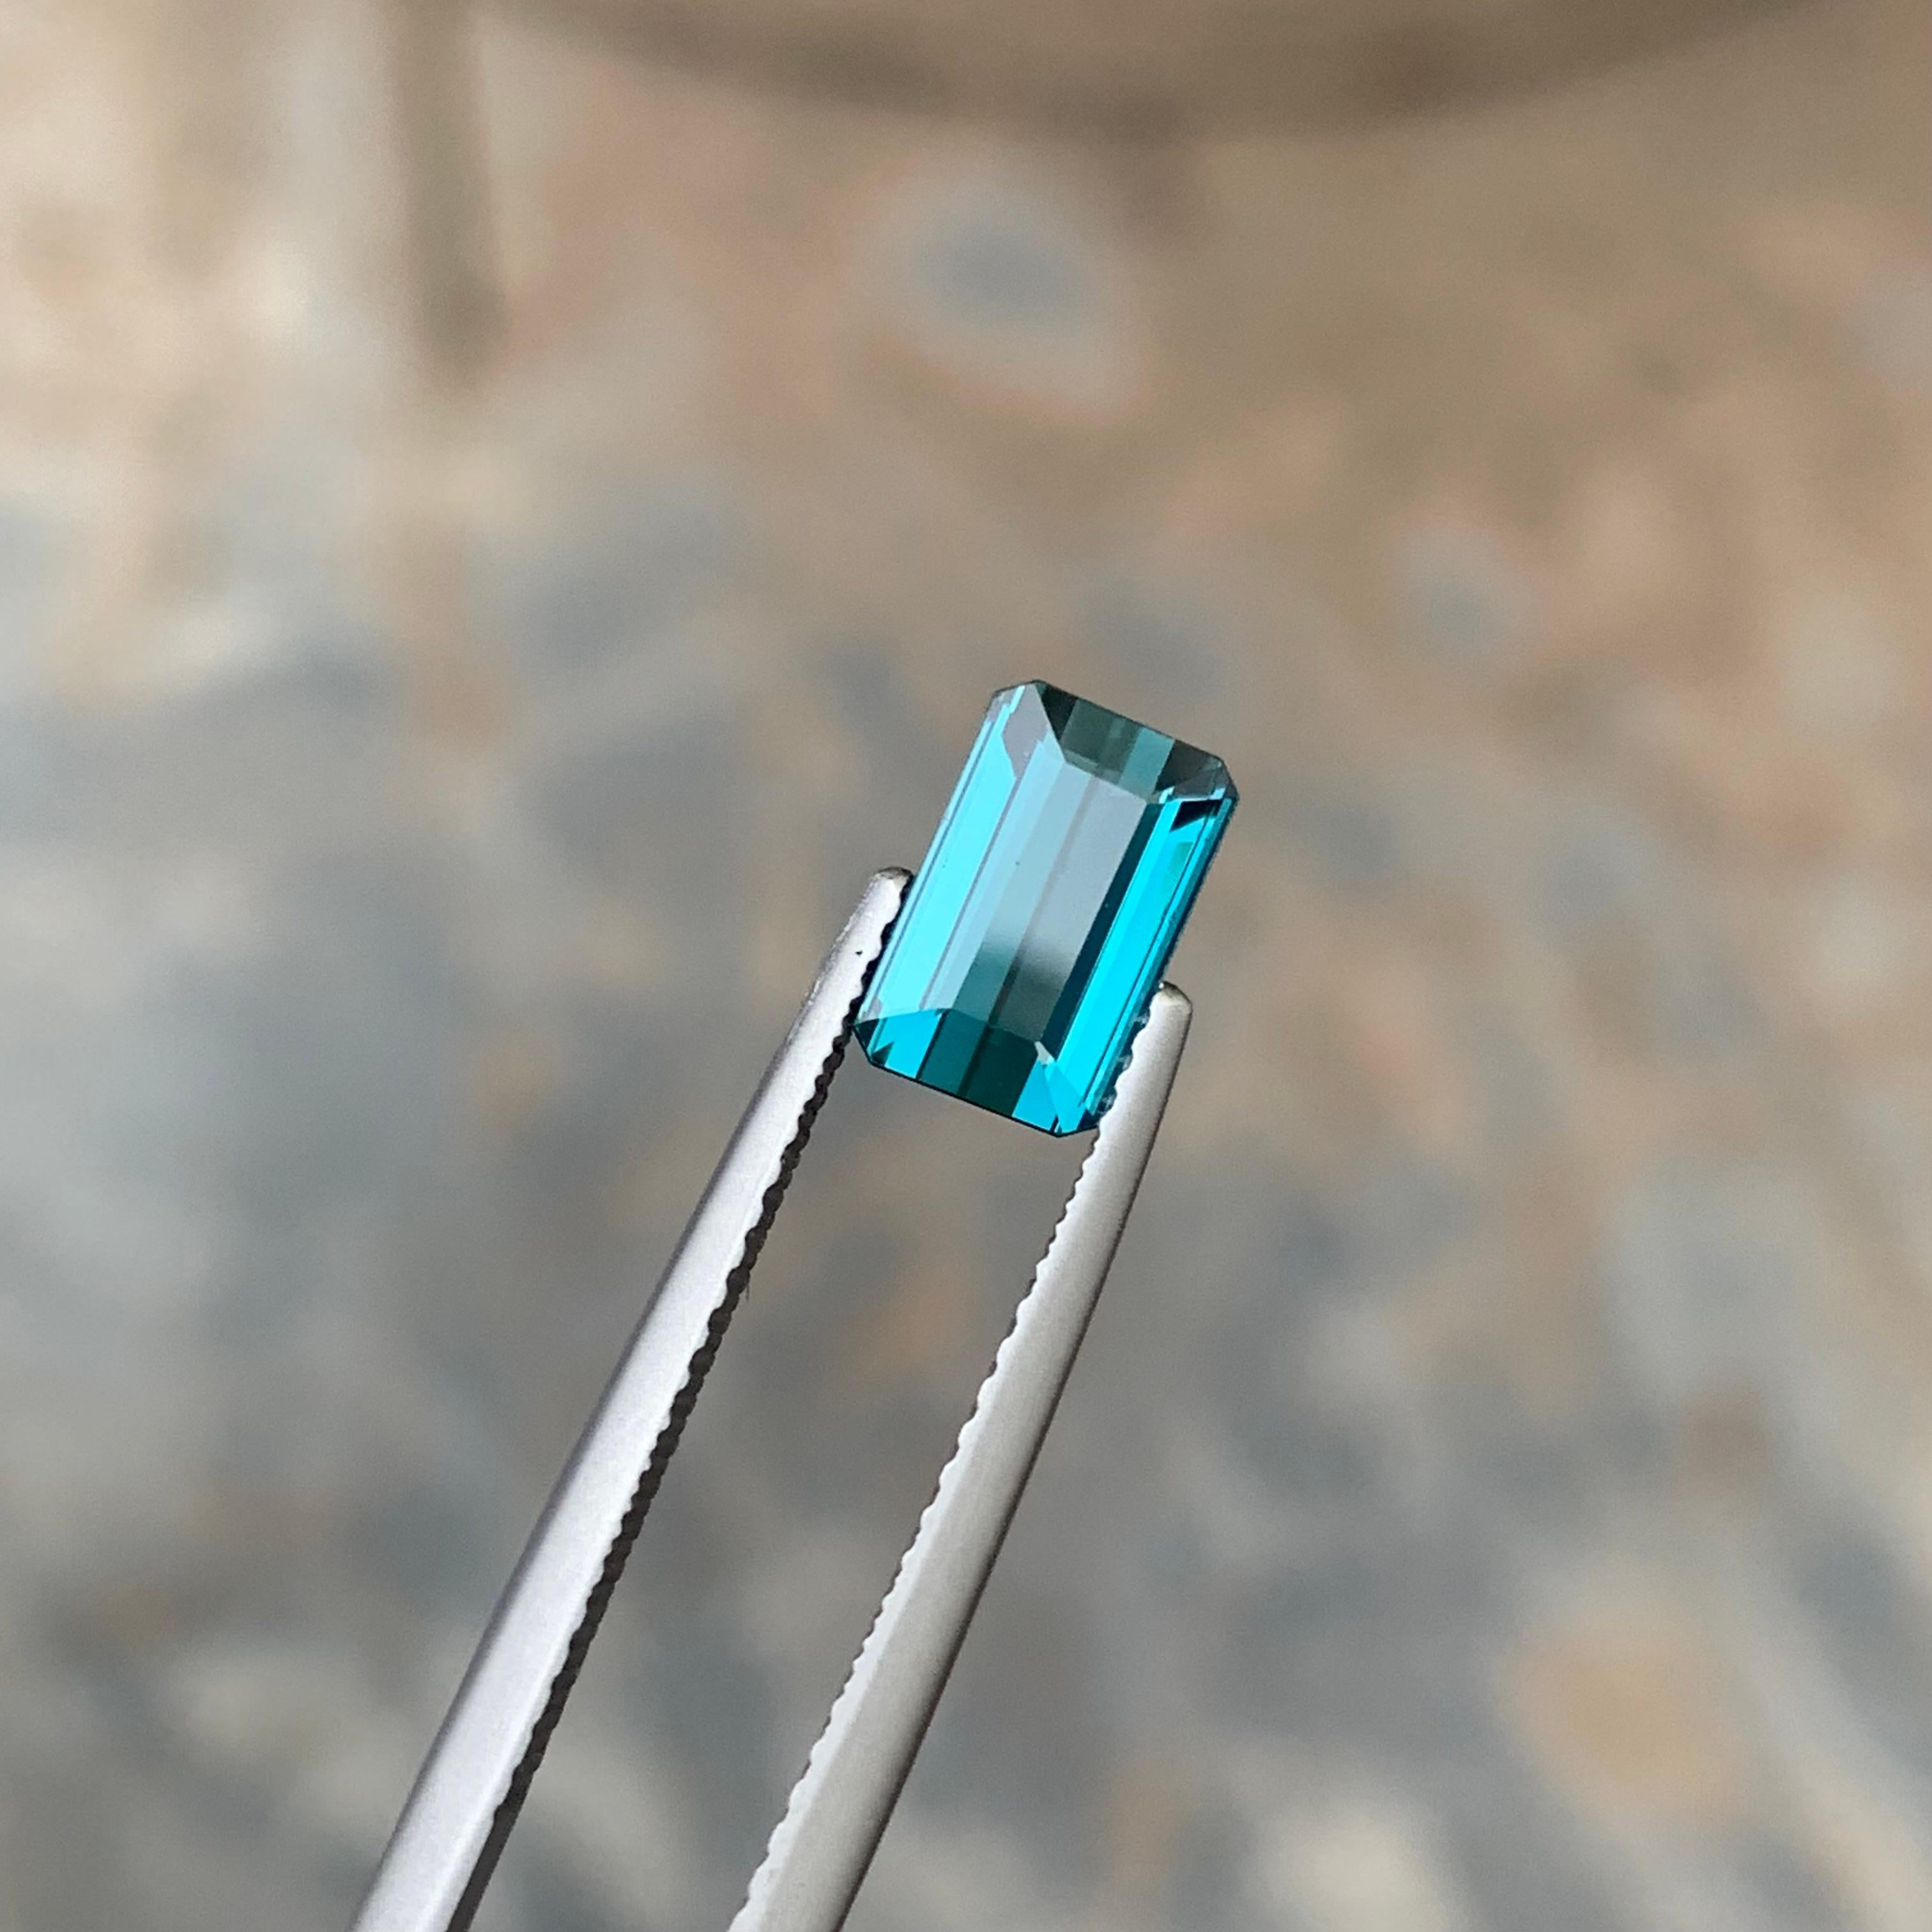 Gorgeous Loose Indicolite Tourmaline
Weight: 1.50 Carats
Dimension: 8.1x5.2x3.6 Mm
Origin; Kunar Afghanistan Mine
Color: Blue
Shape: Emerald
Treatment: Non
Certificate: On Demand
Indicolite tourmalines (tourmalines with blue in them) are rare.